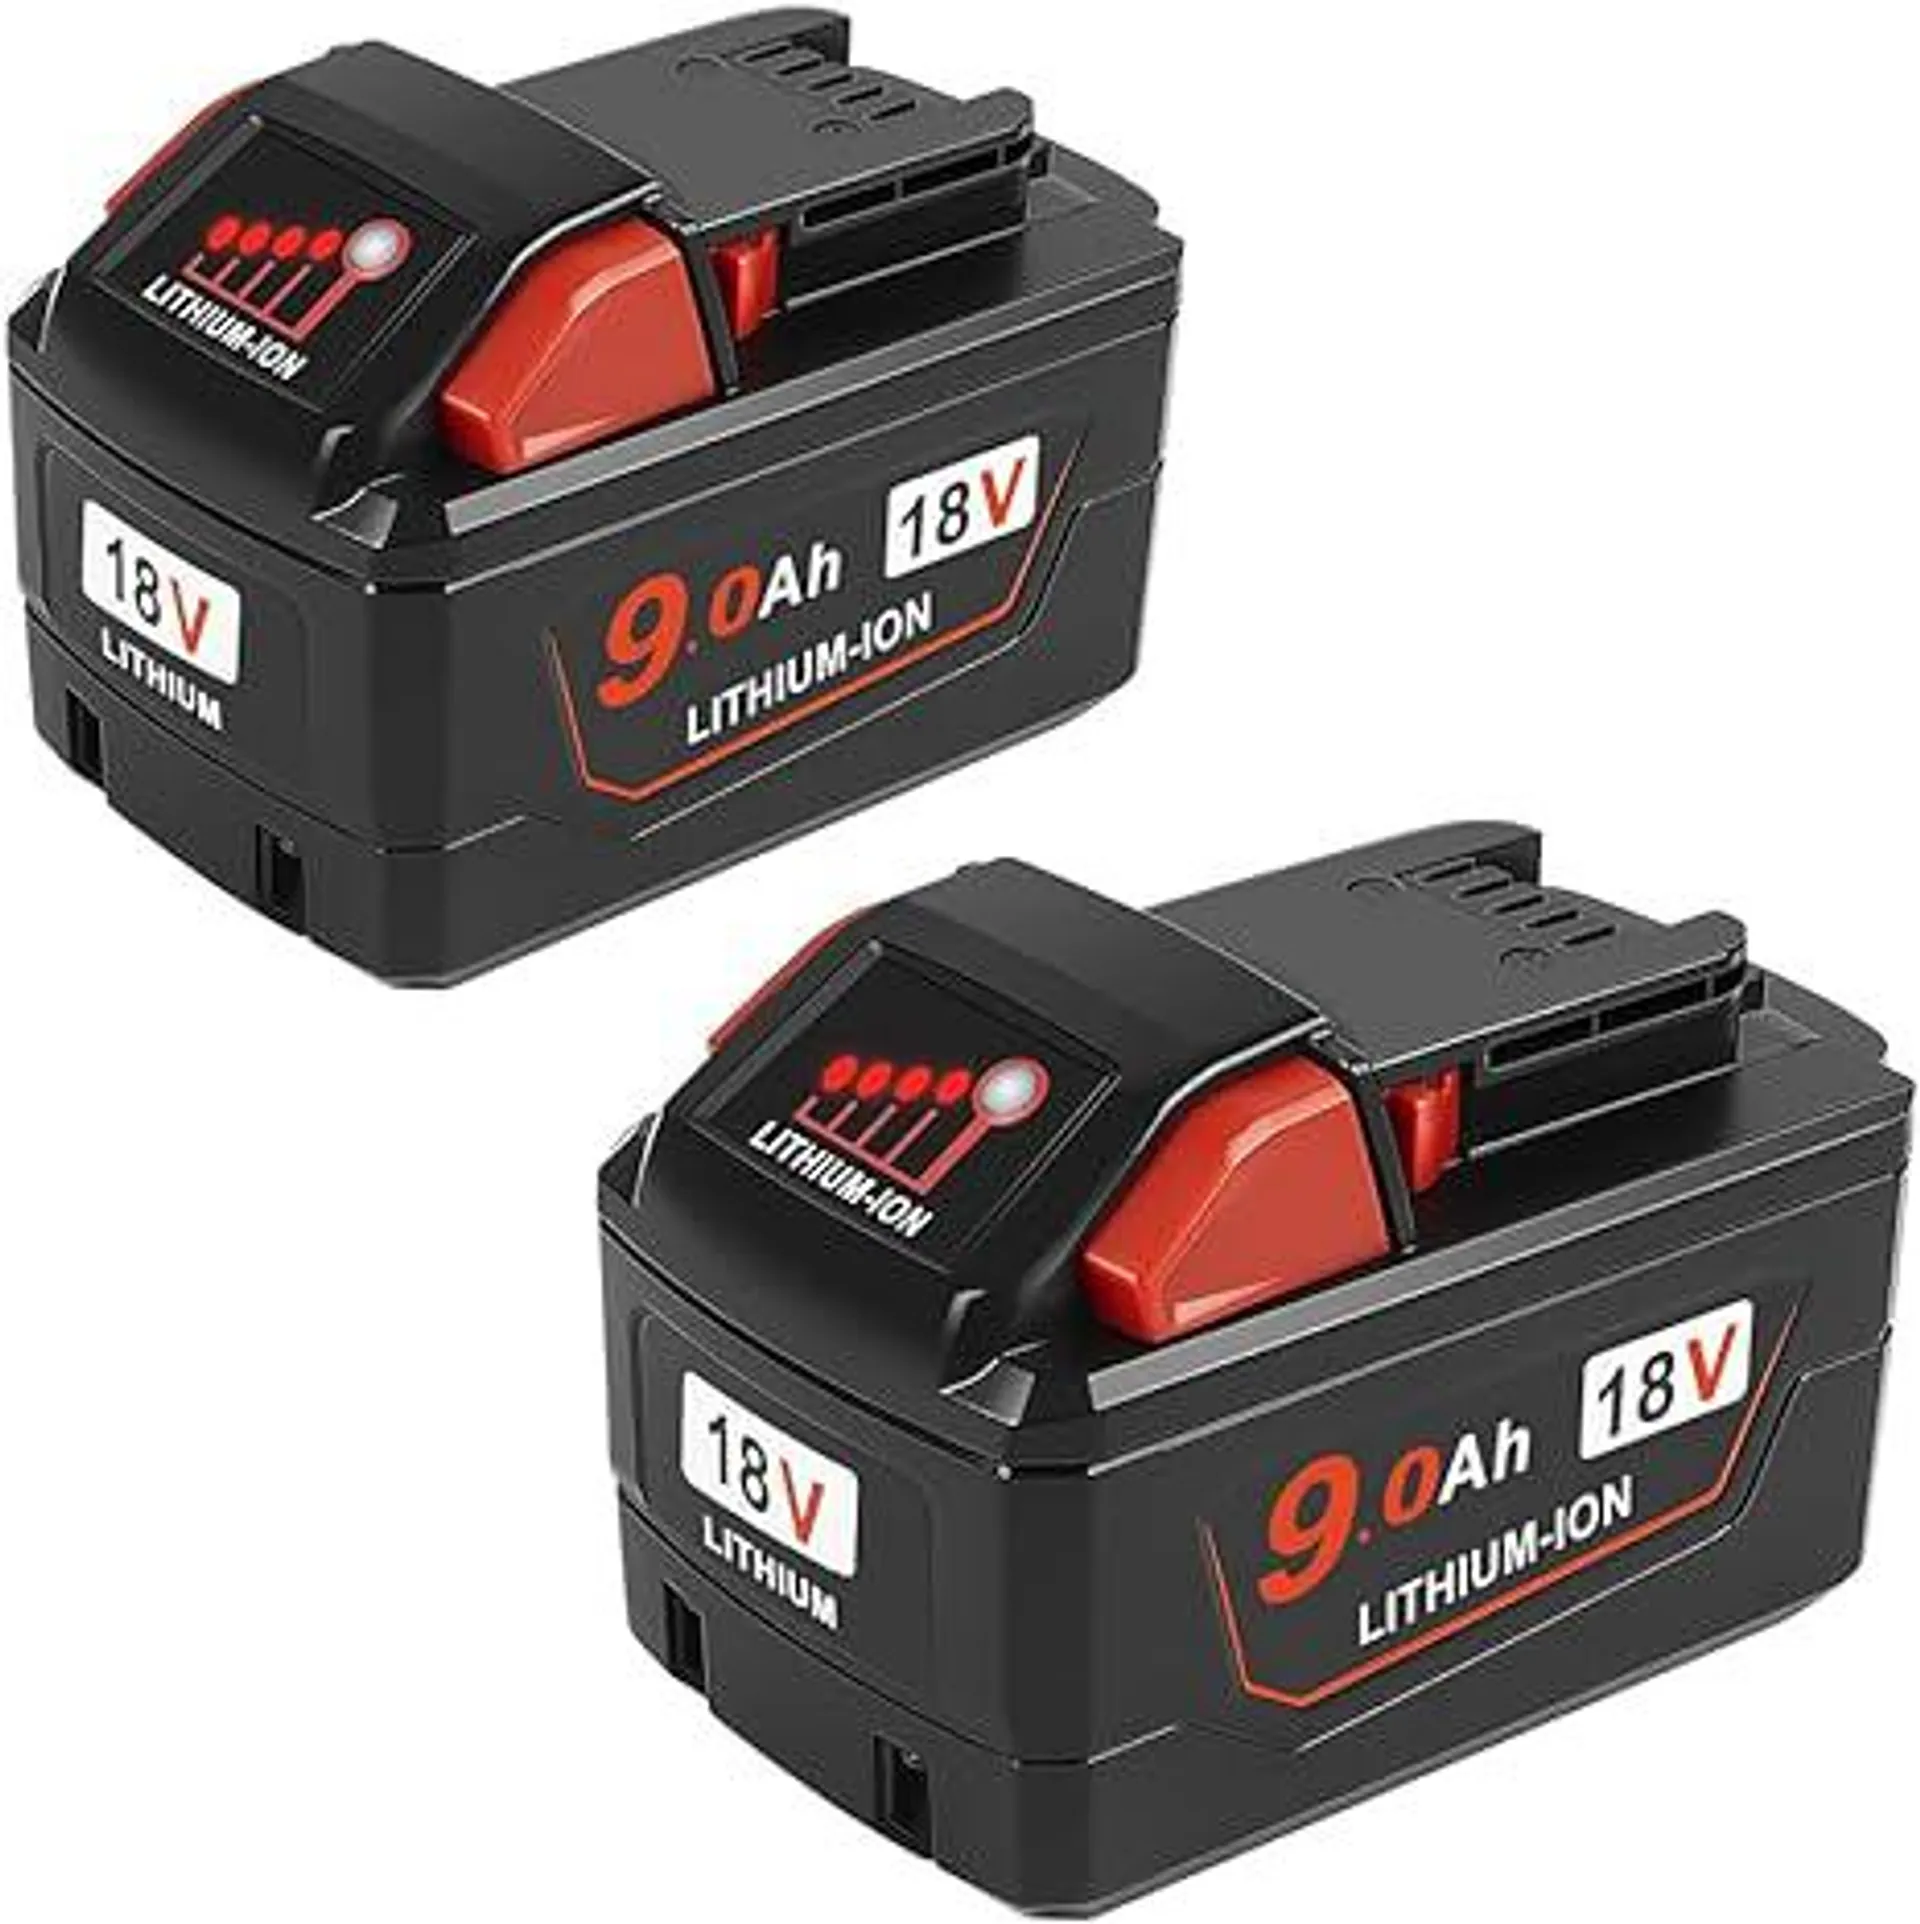 Aoasur 9.0Ah 18V Battery Replacement for Milwaukee M - 18 Battery(2- Pack)